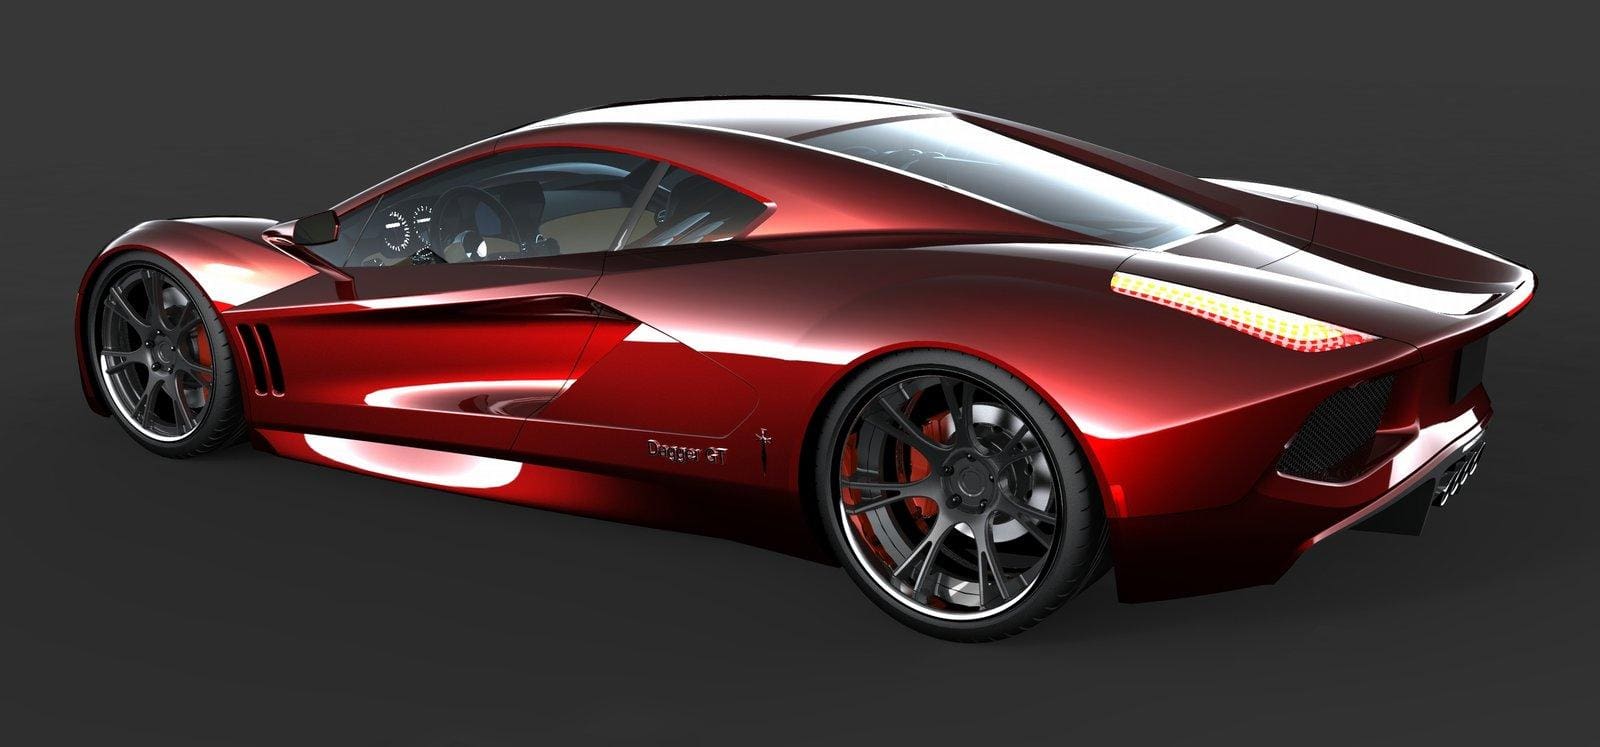  Racing Dagger GT plans to be World39;s Fastest Car  My Car Heaven